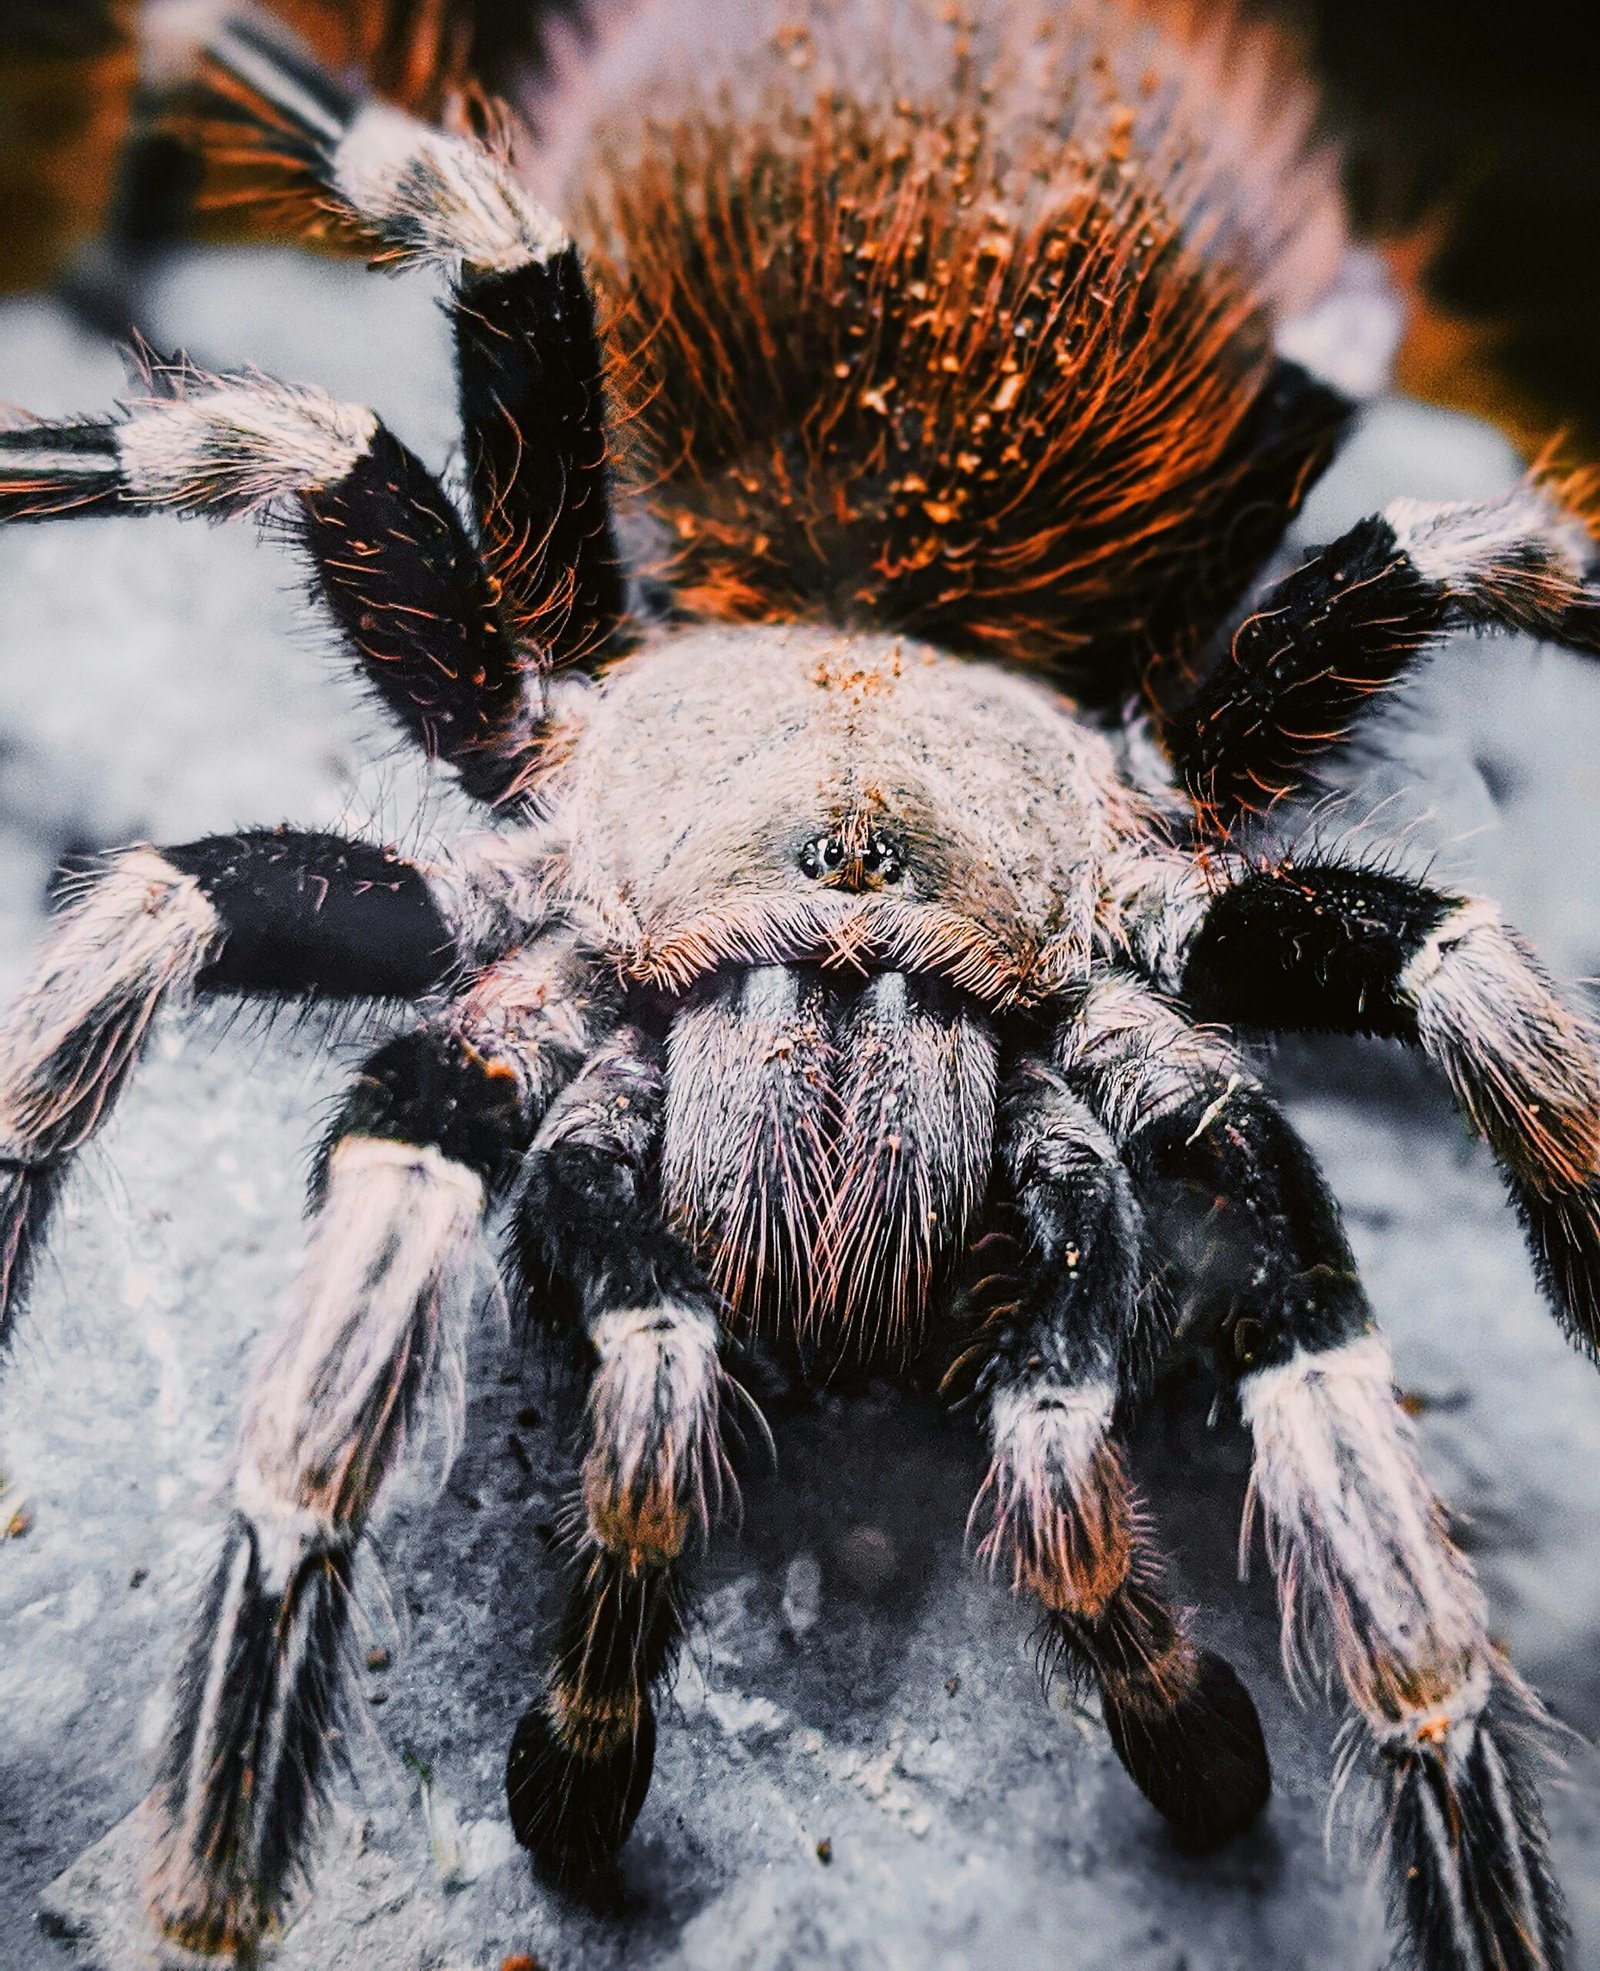 What Is The Feeding Behavior Of The Stunning Goliath Bird-eater Tarantula, And What Prey Items Are Suitable?